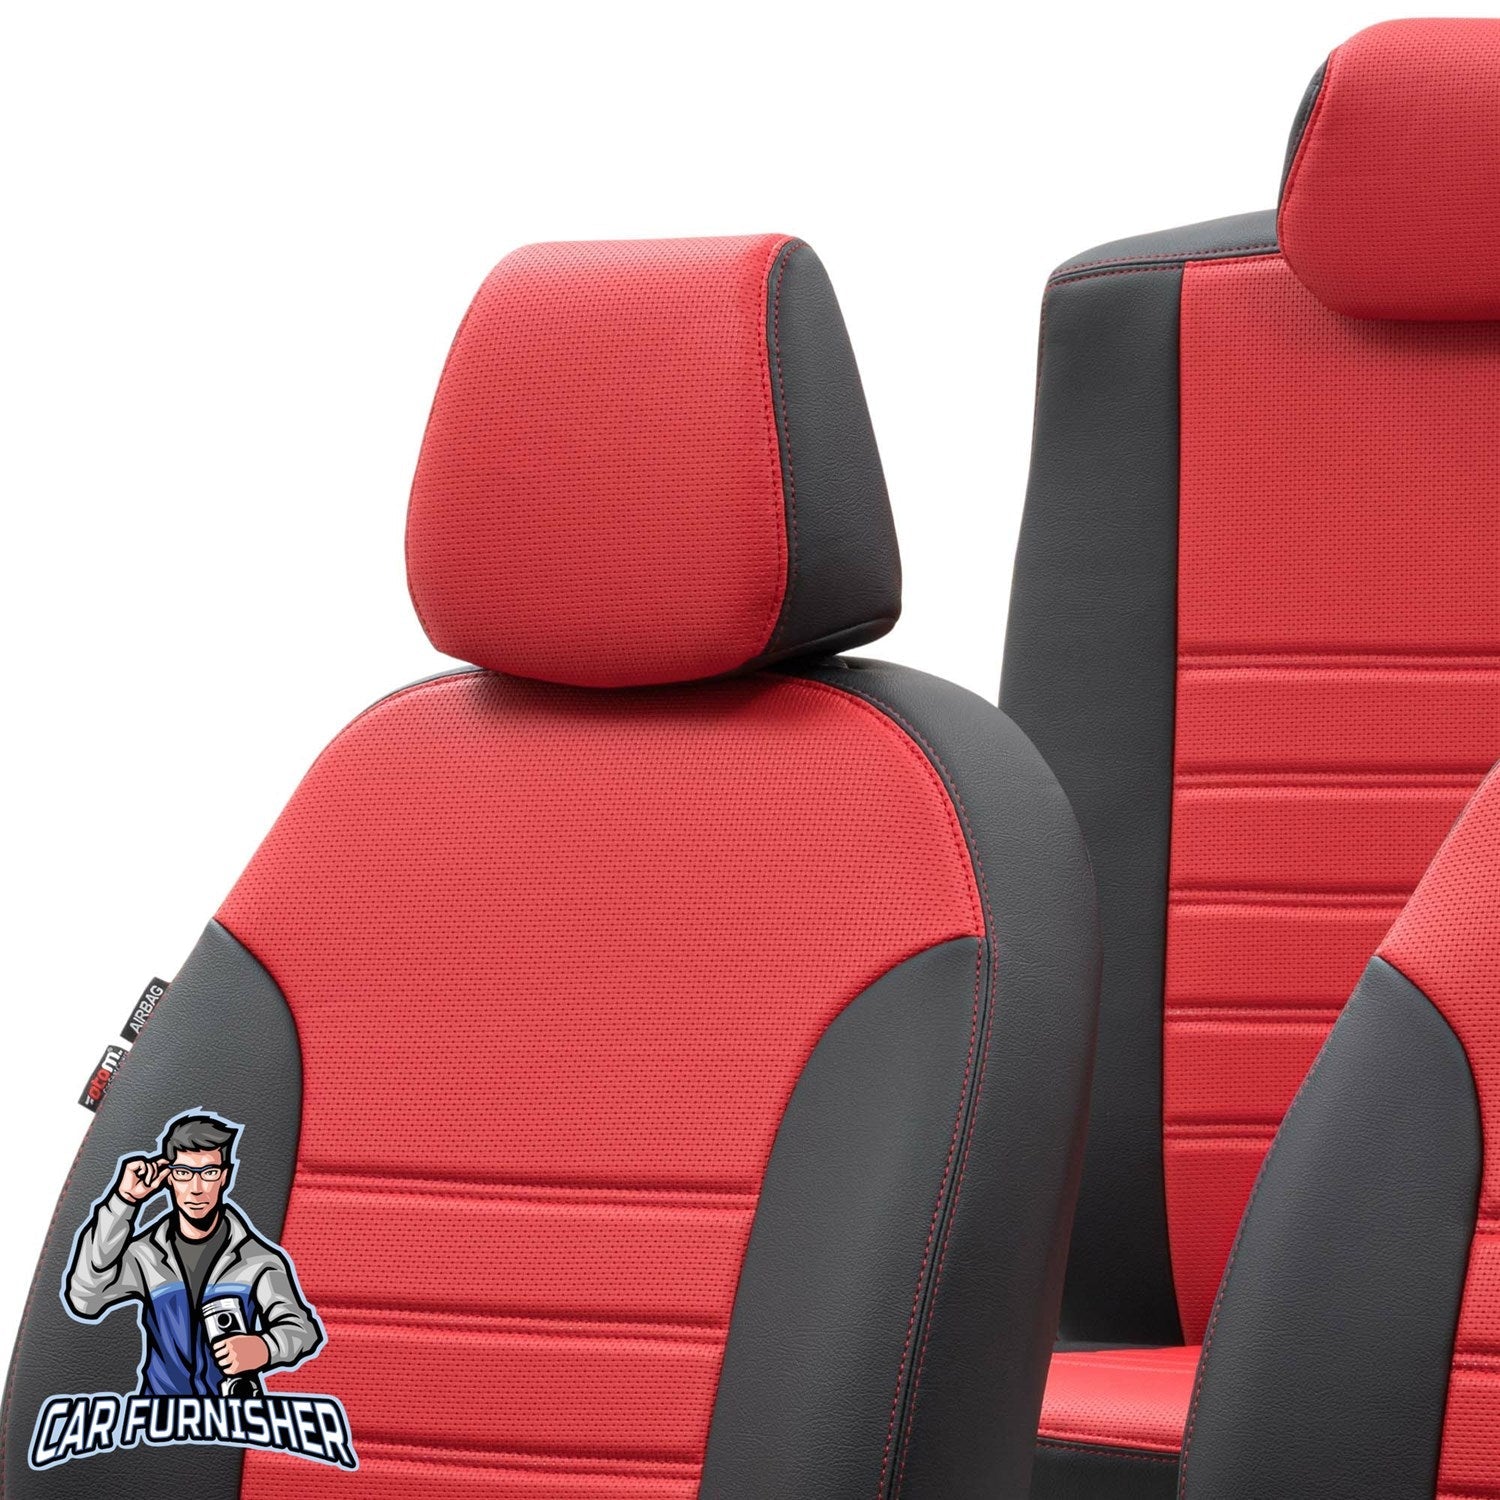 Mazda CX-3 Seat Covers New York Leather Design Red Leather